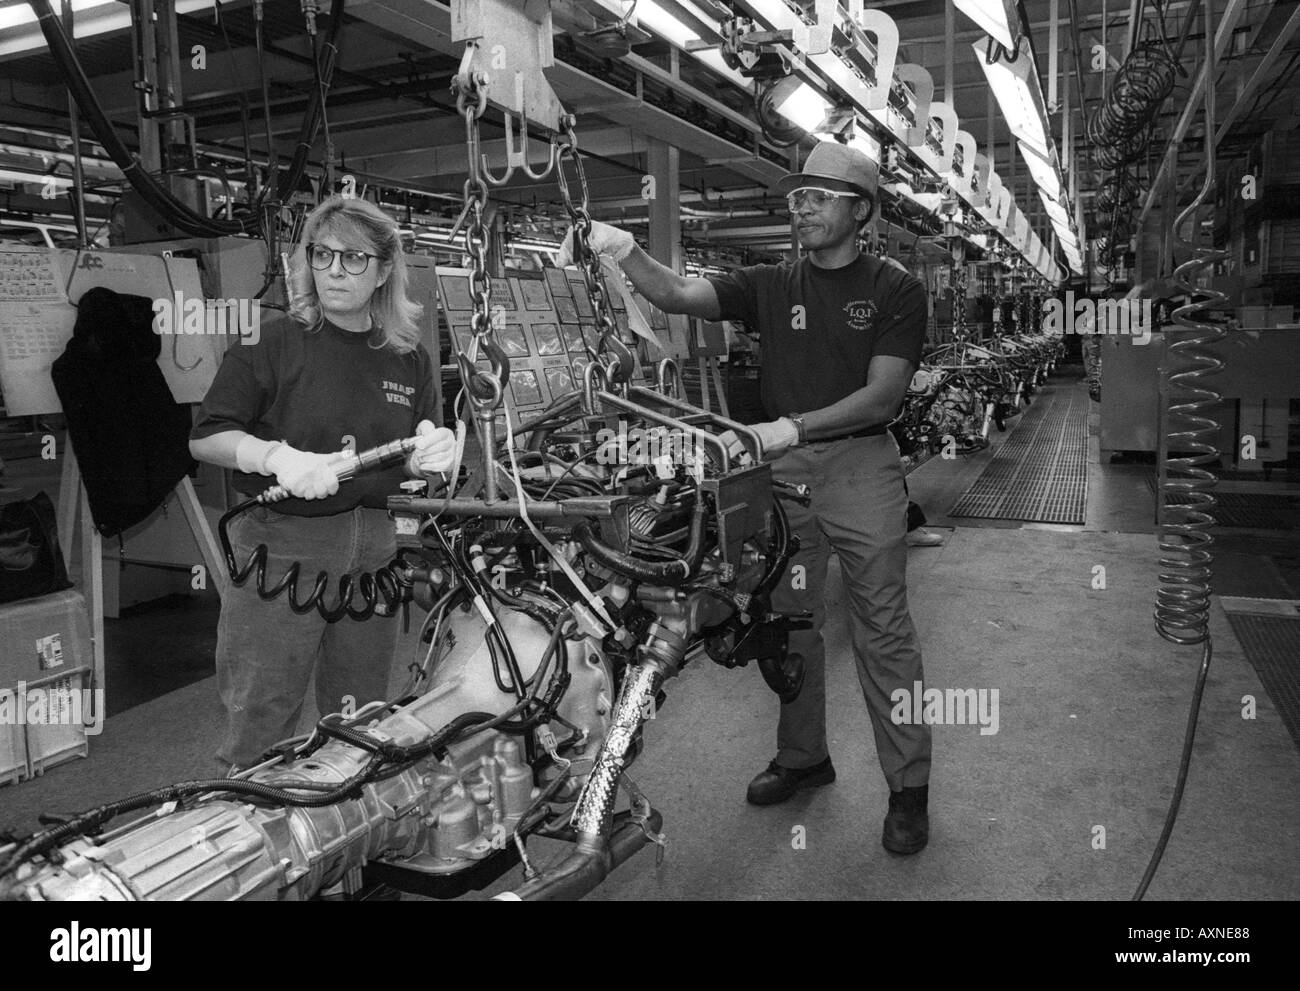 Workers at DaimlerChrysler Auto Assembly Plant in Detroit Stock Photo